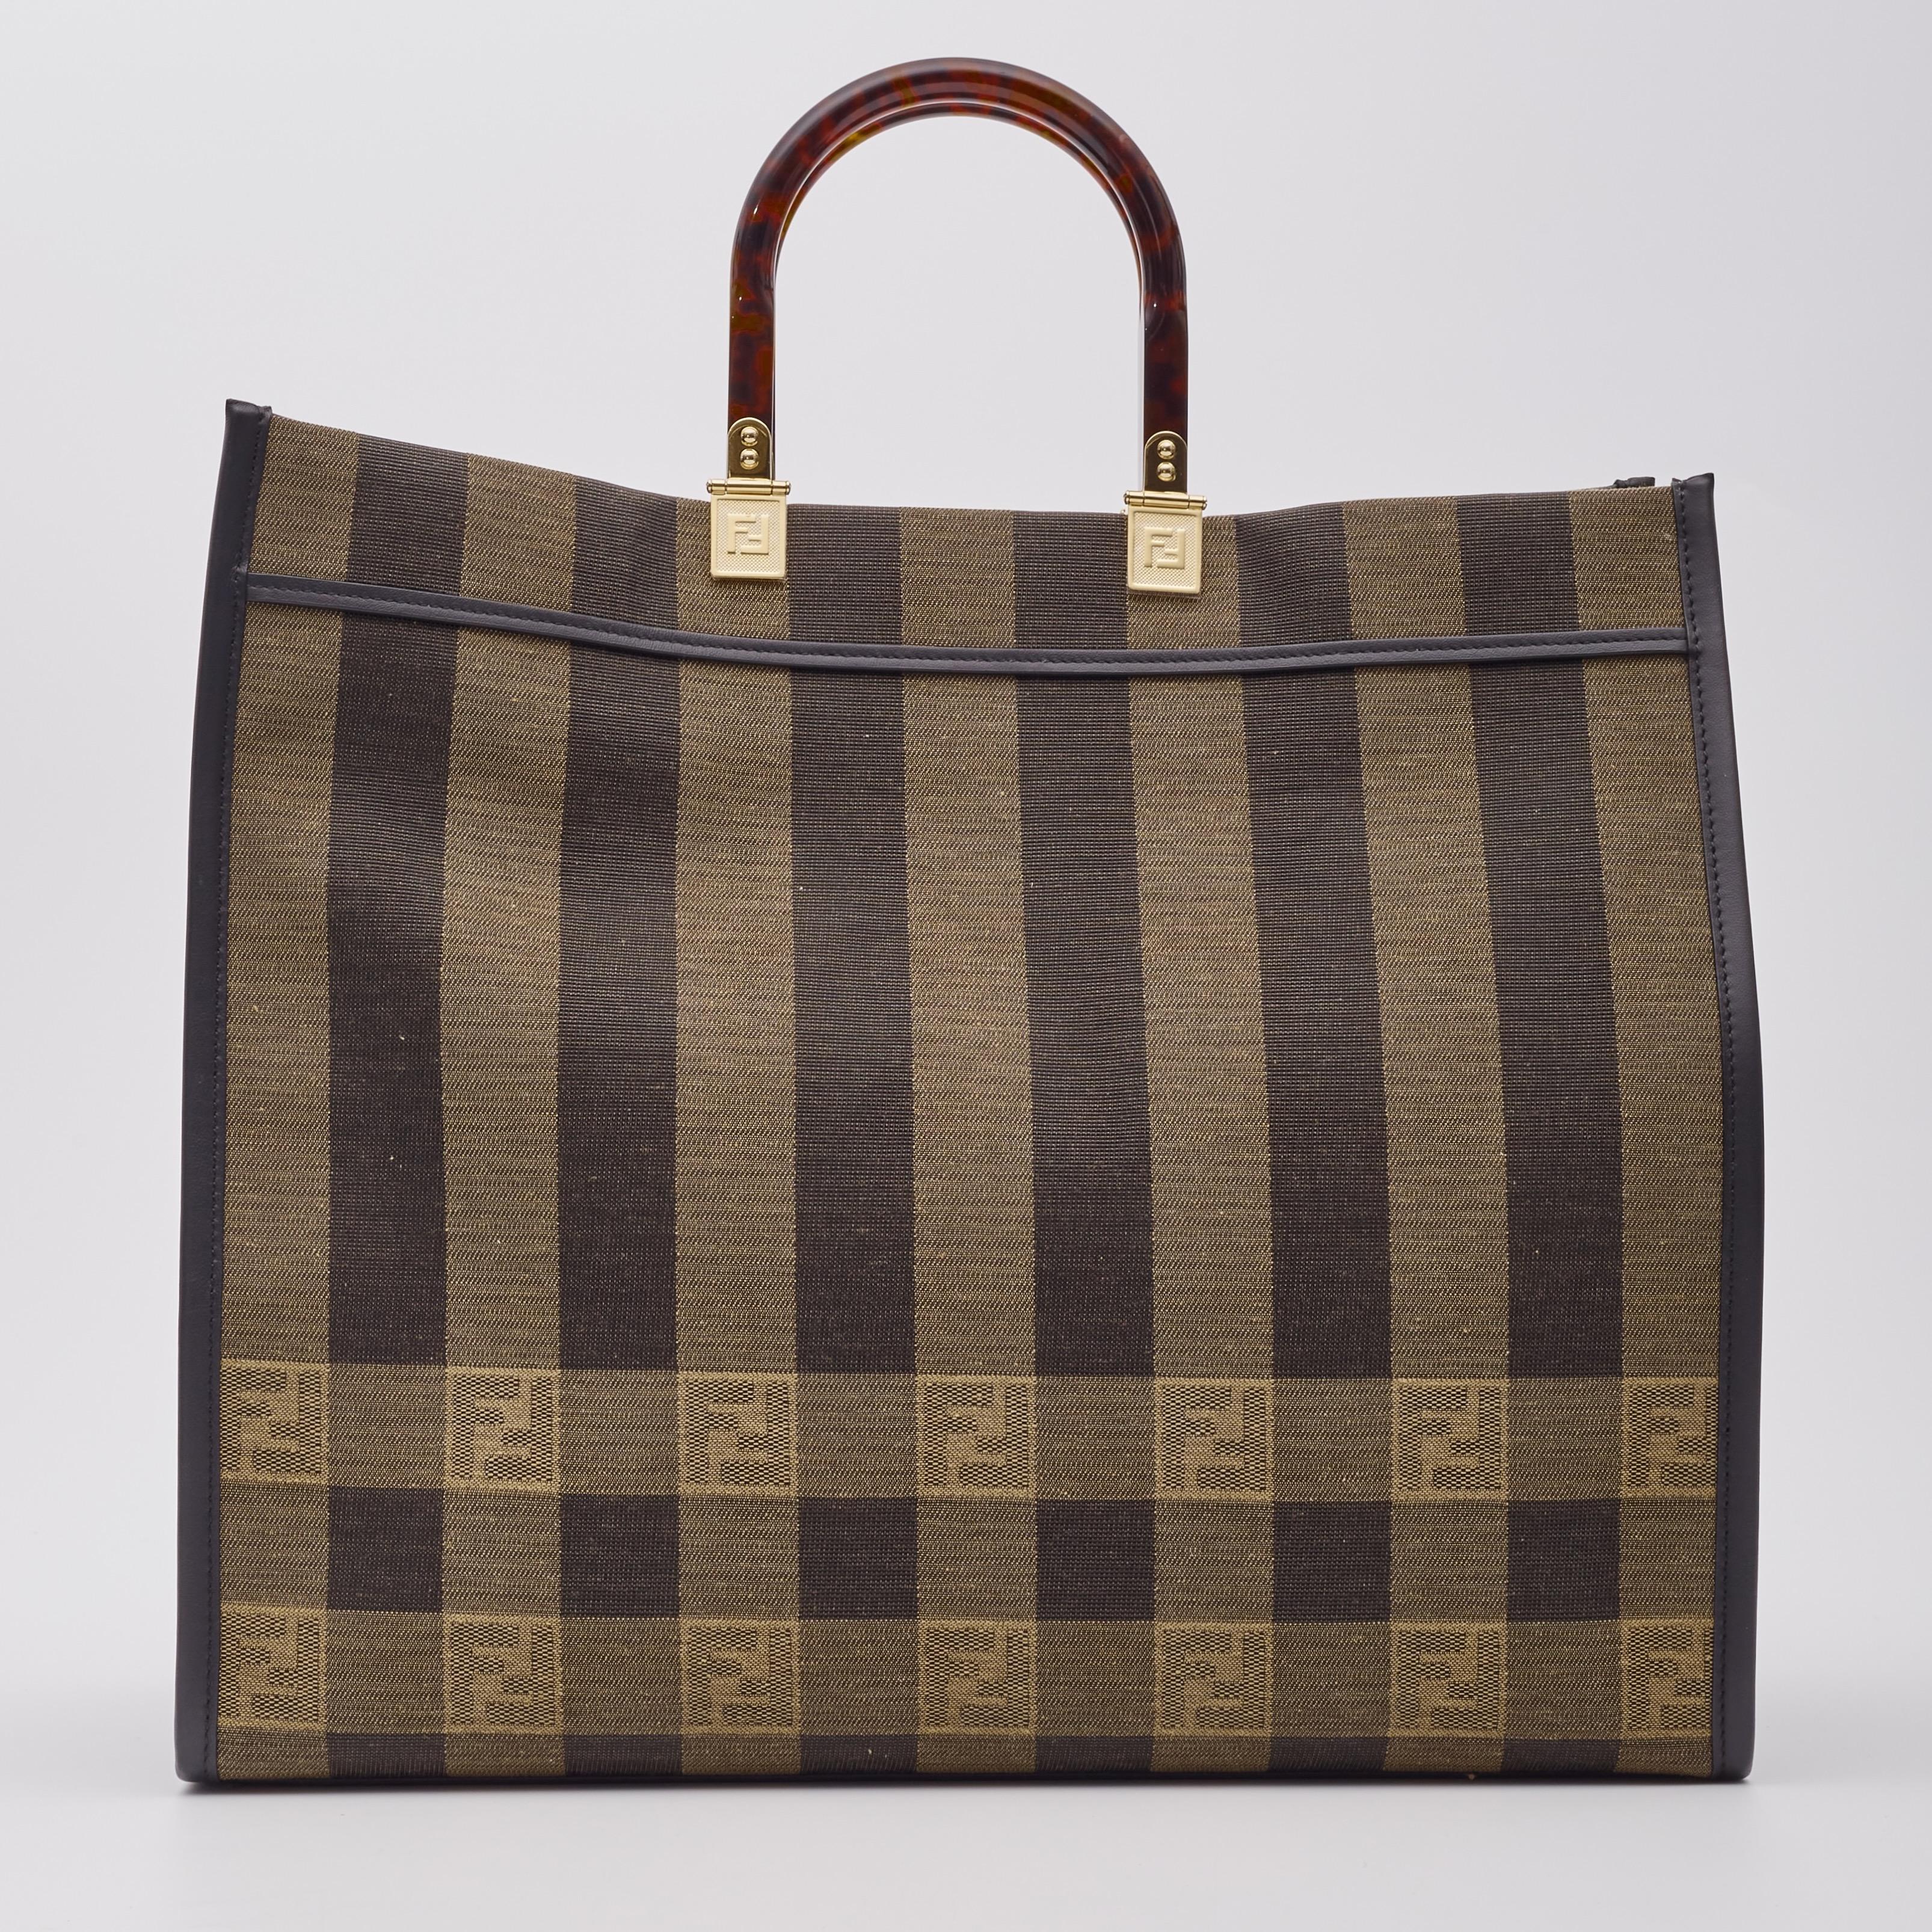 Fendi Pequin Canvas Sunshine Shopper Tote Tobacco Large In Excellent Condition For Sale In Montreal, Quebec